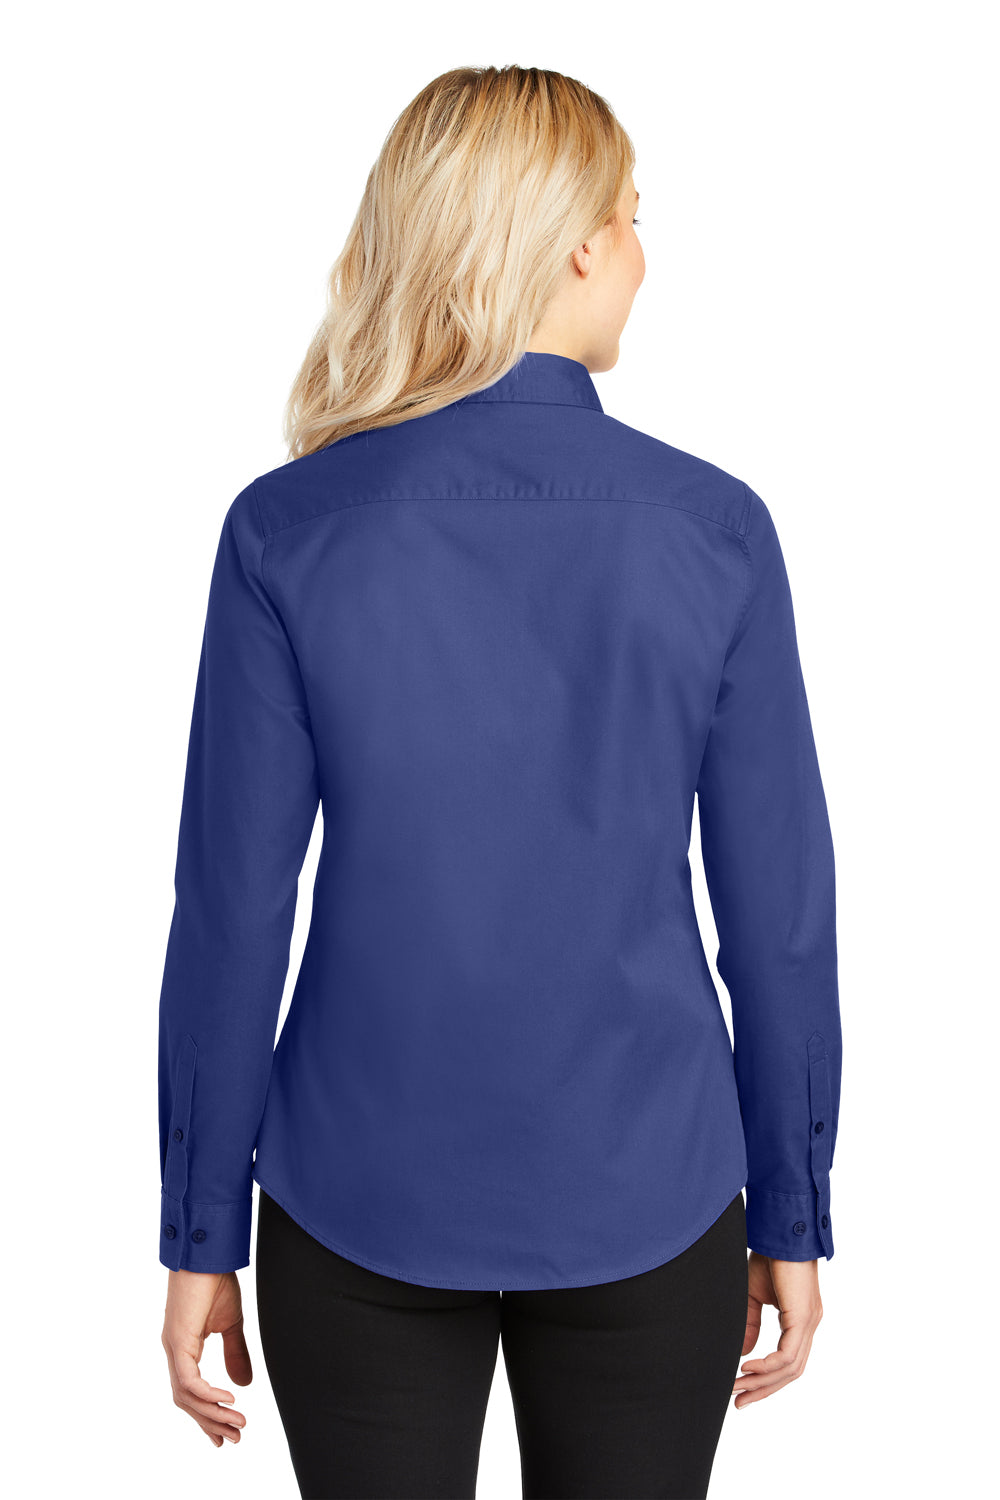 Port Authority L608 Womens Easy Care Wrinkle Resistant Long Sleeve Button Down Shirt Mediterranean Blue Back